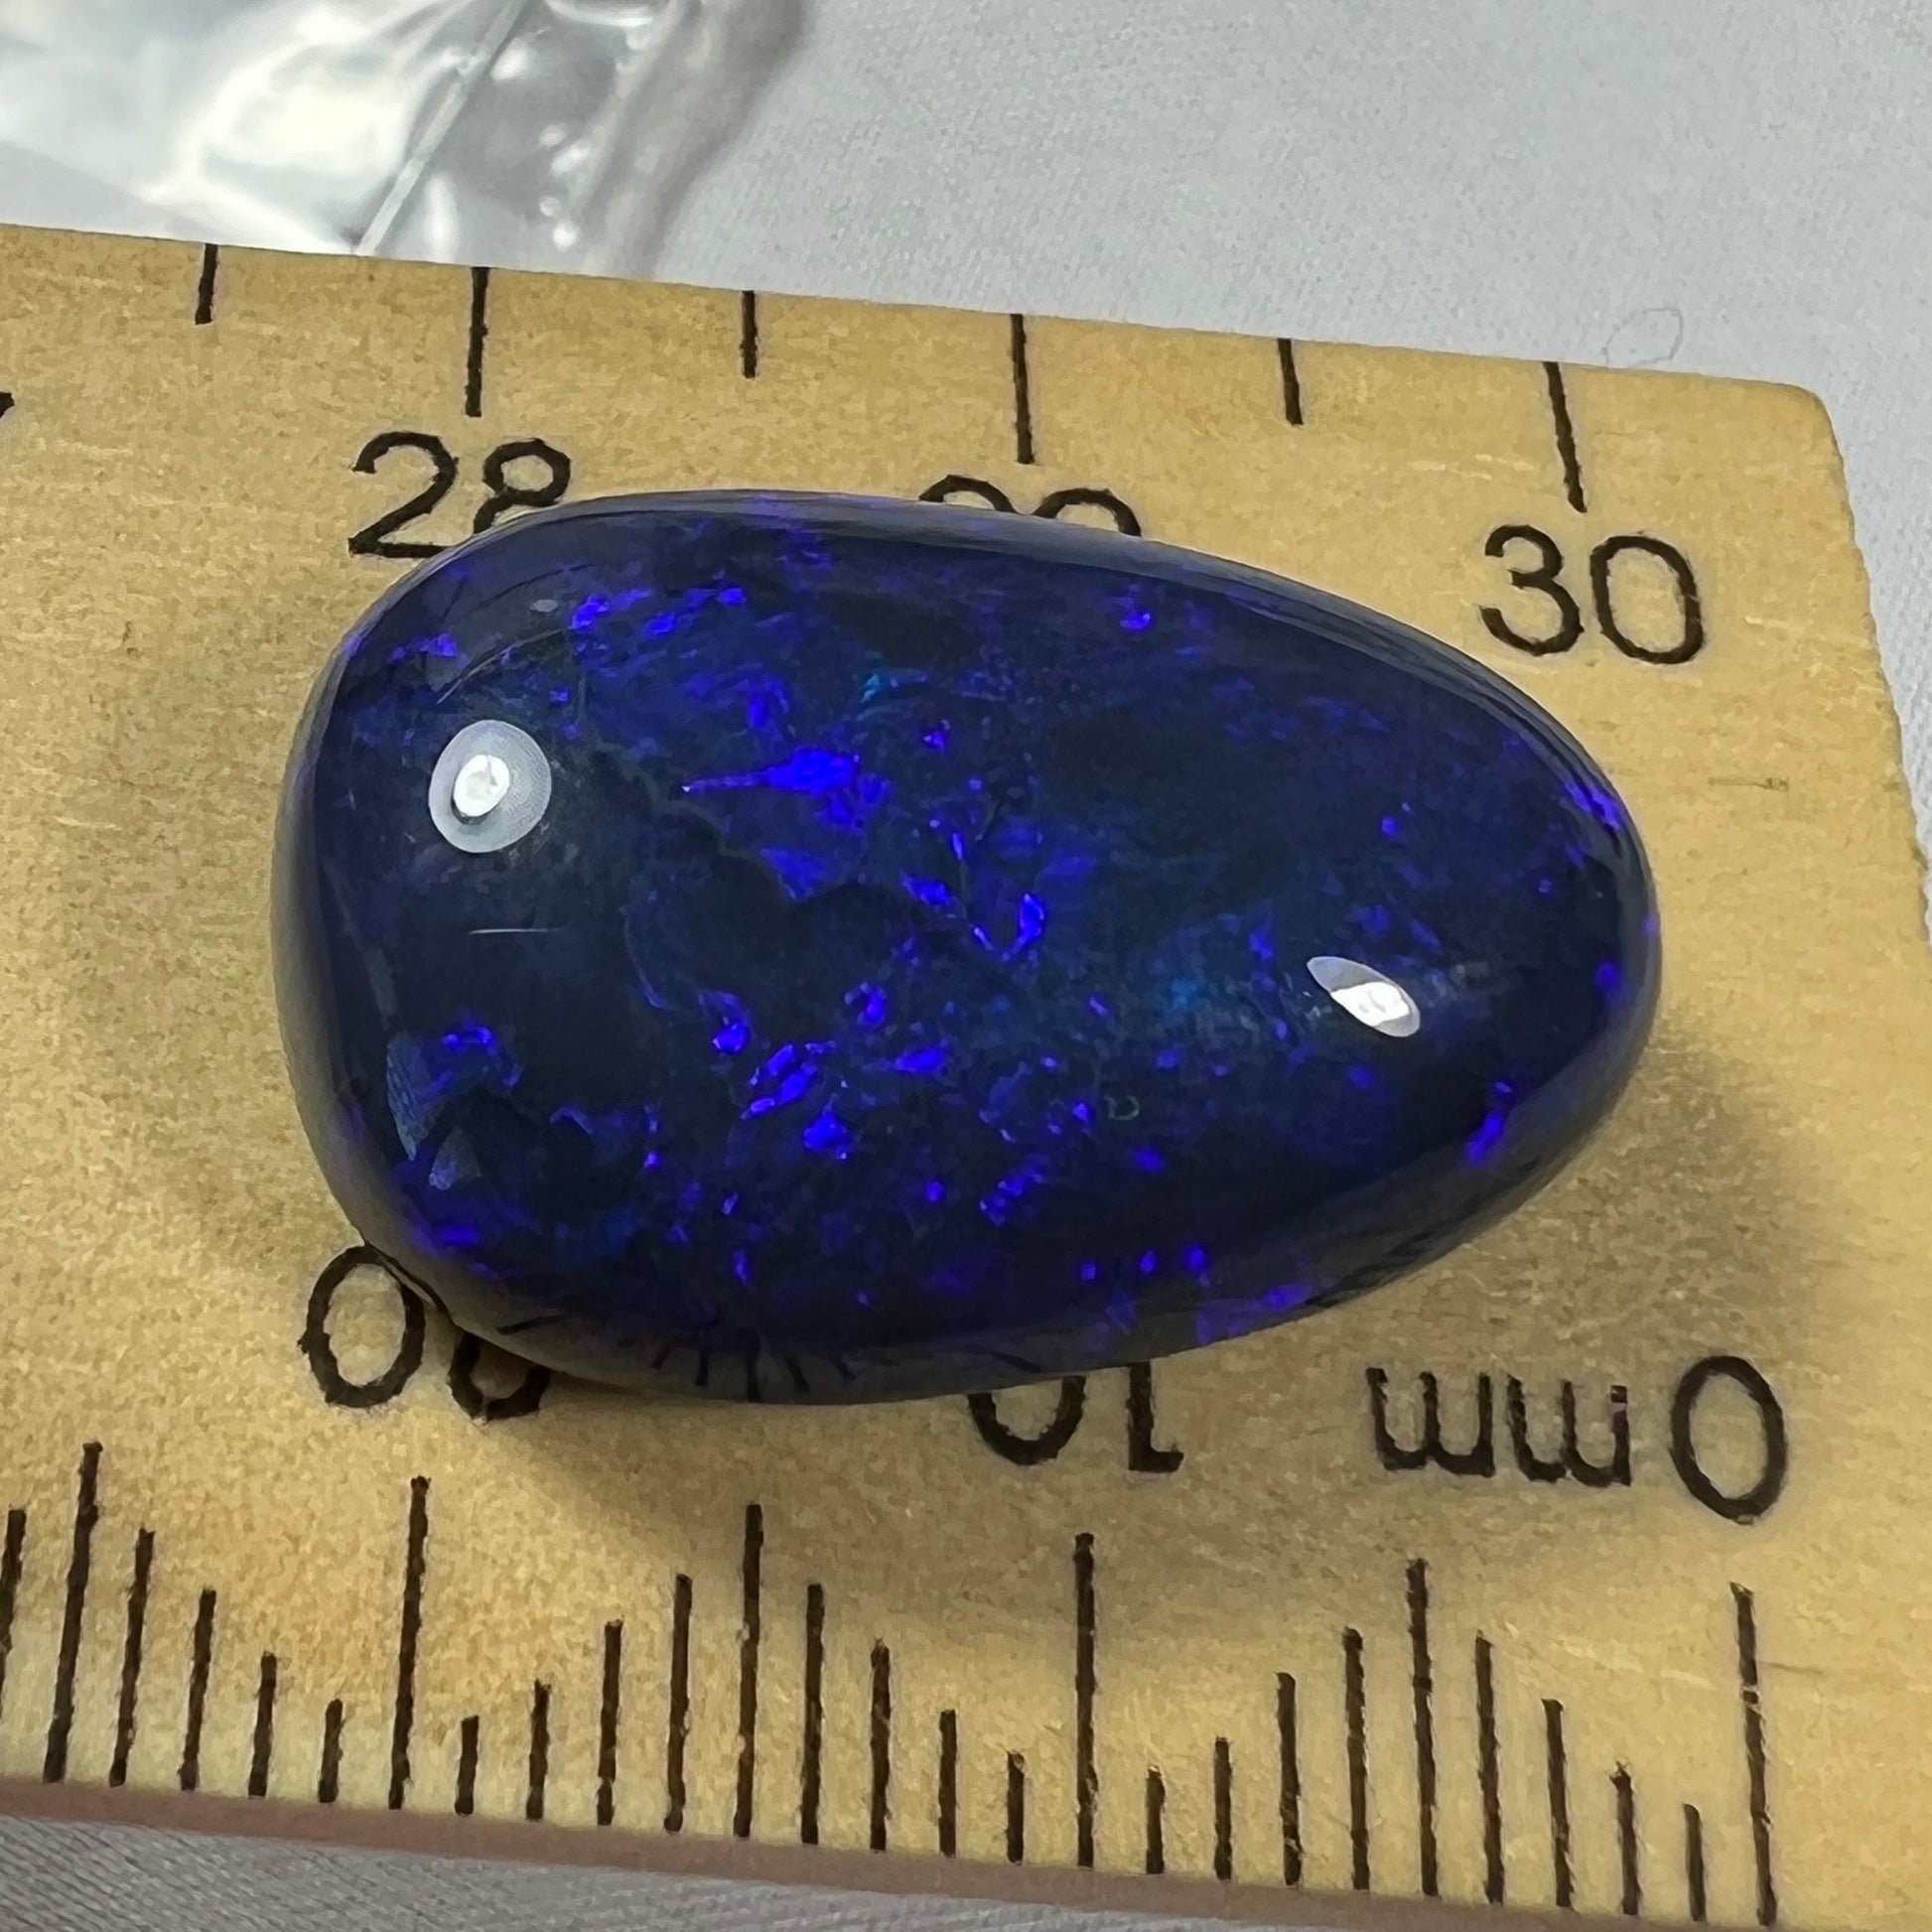 'Blue on black' solid black opal from Lightning Ridge. Perfect quality with awesome deep blue colour. This stone originated in the rough from the Tunnel Rats and was supplied to us from Phoenix Gems.